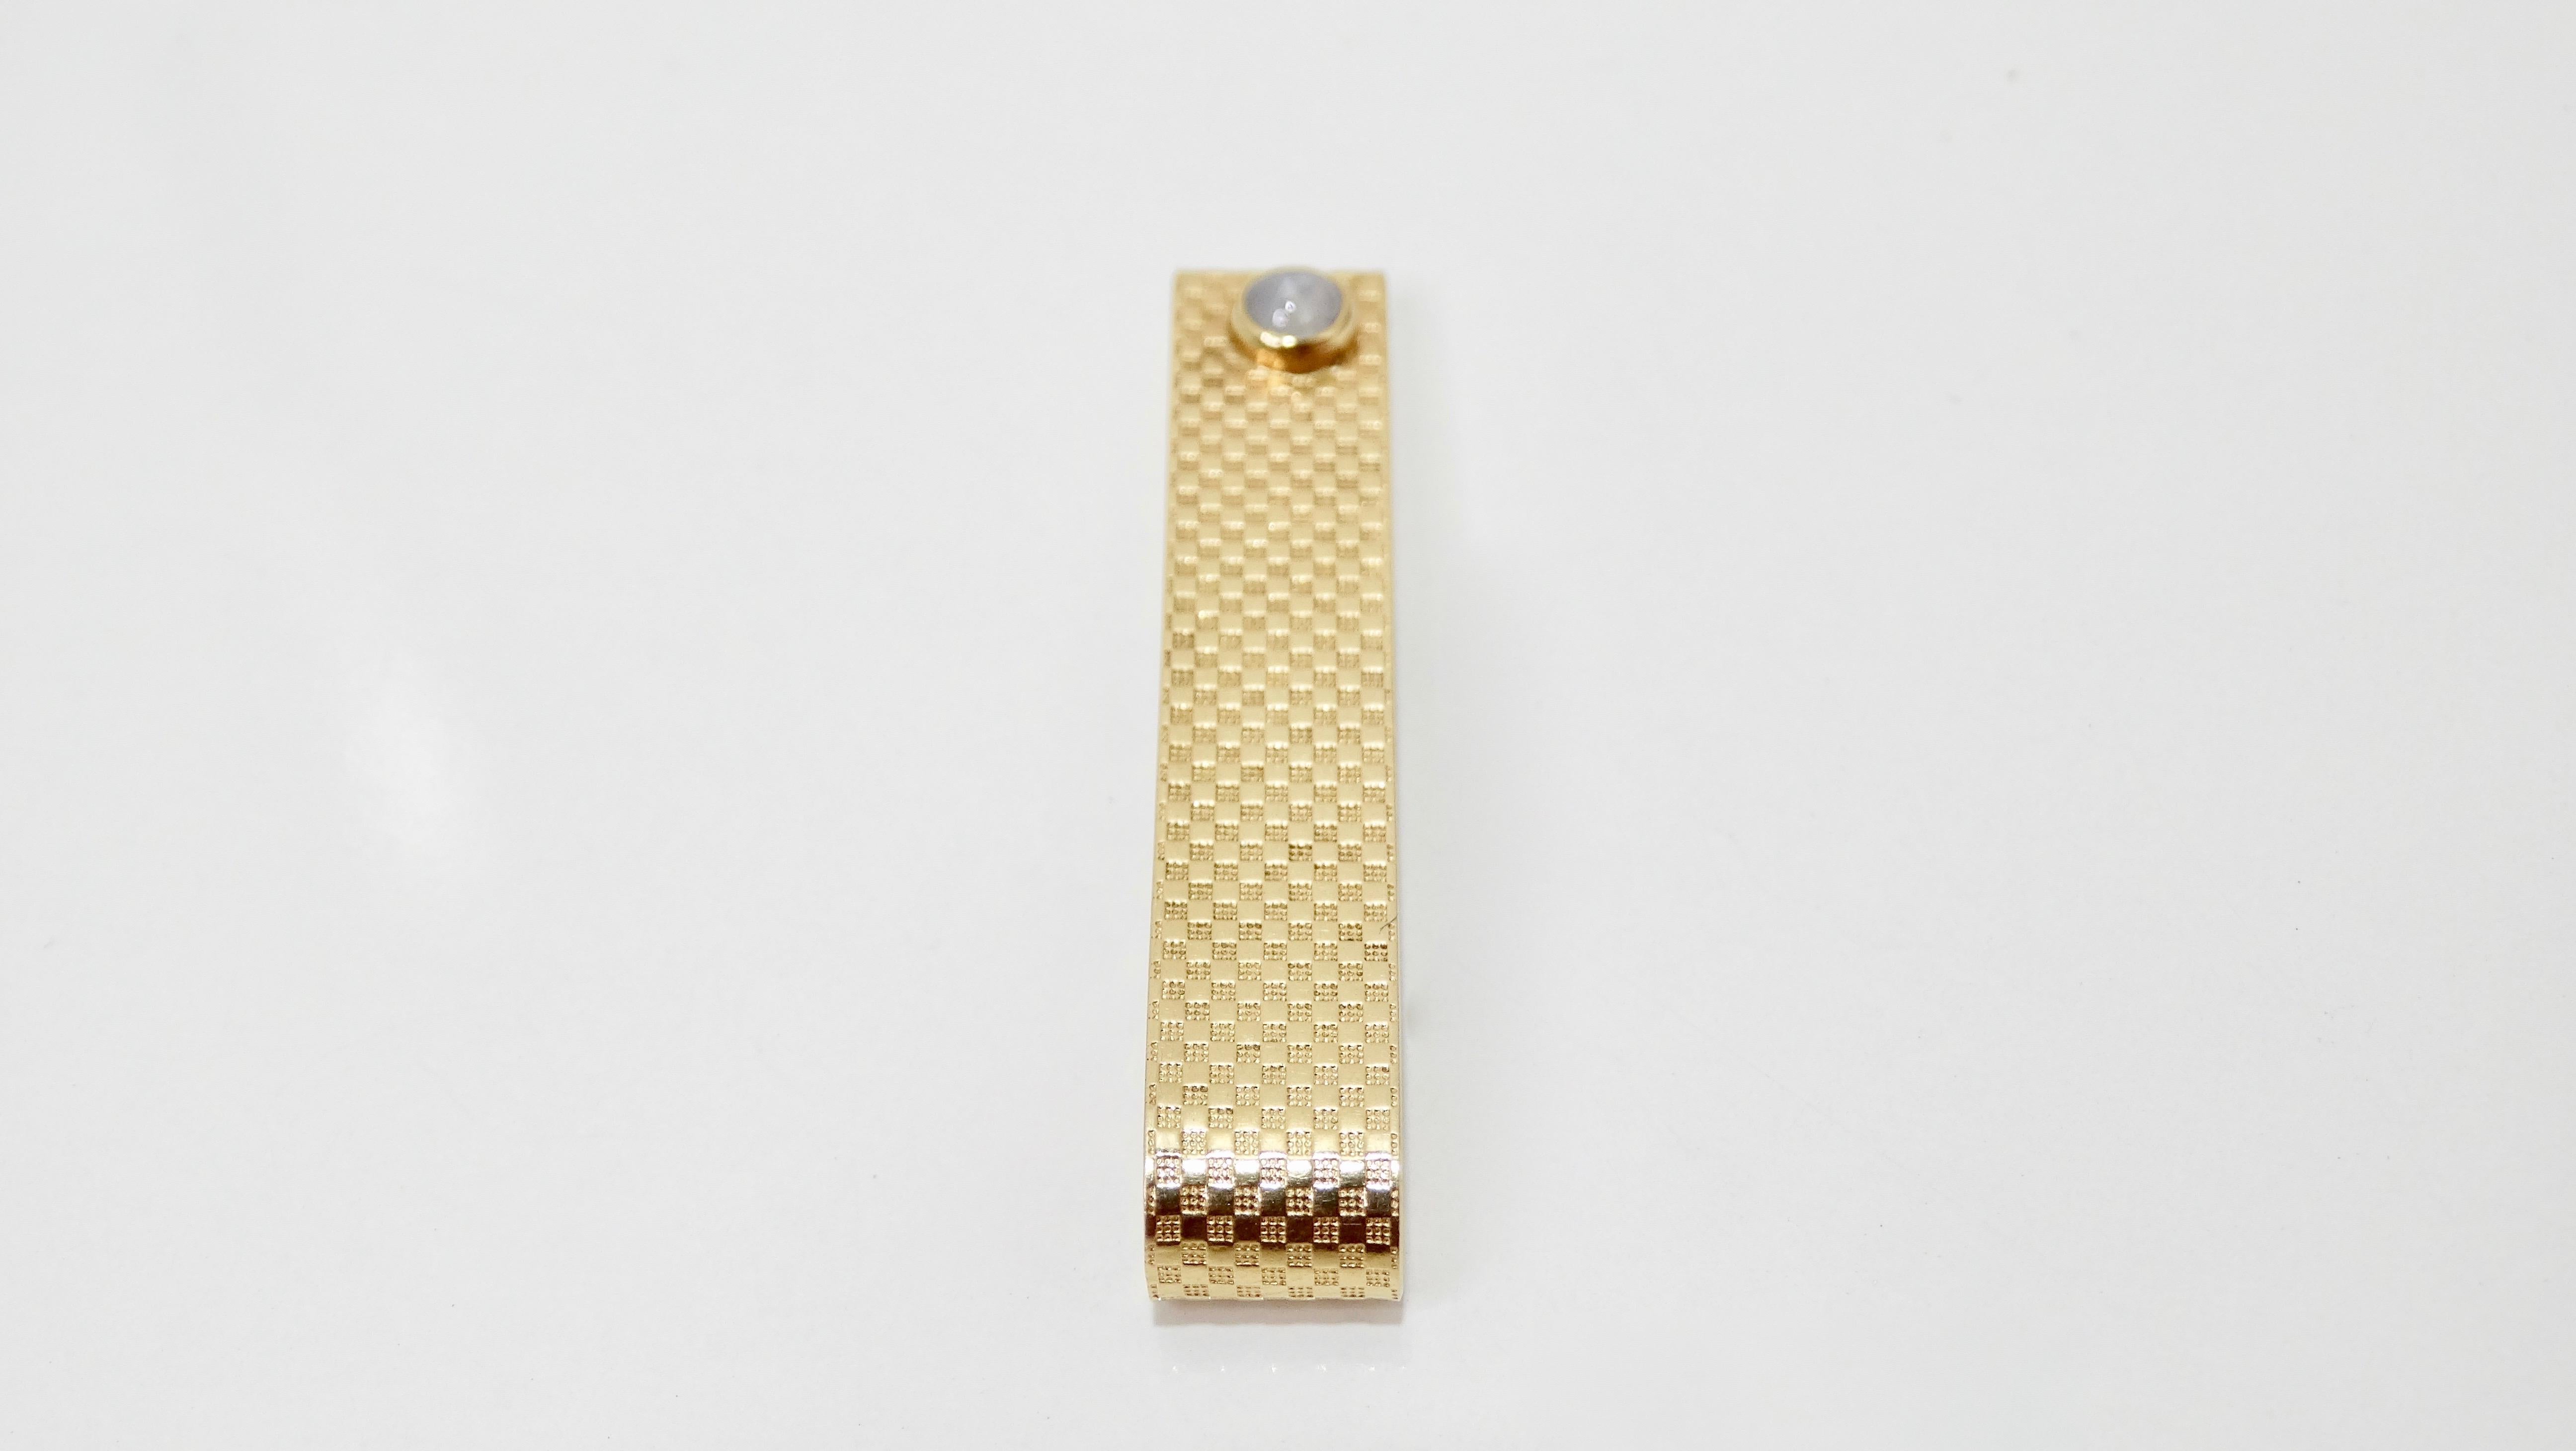 Elevate your tie with this timeless tie clip! Circa mid 20th century, this tie clip is crafted from 14k gold and is embossed with a textured checkered pattern. Features a gorgeous star sapphire and a slide closure for secure wear. Total weight is